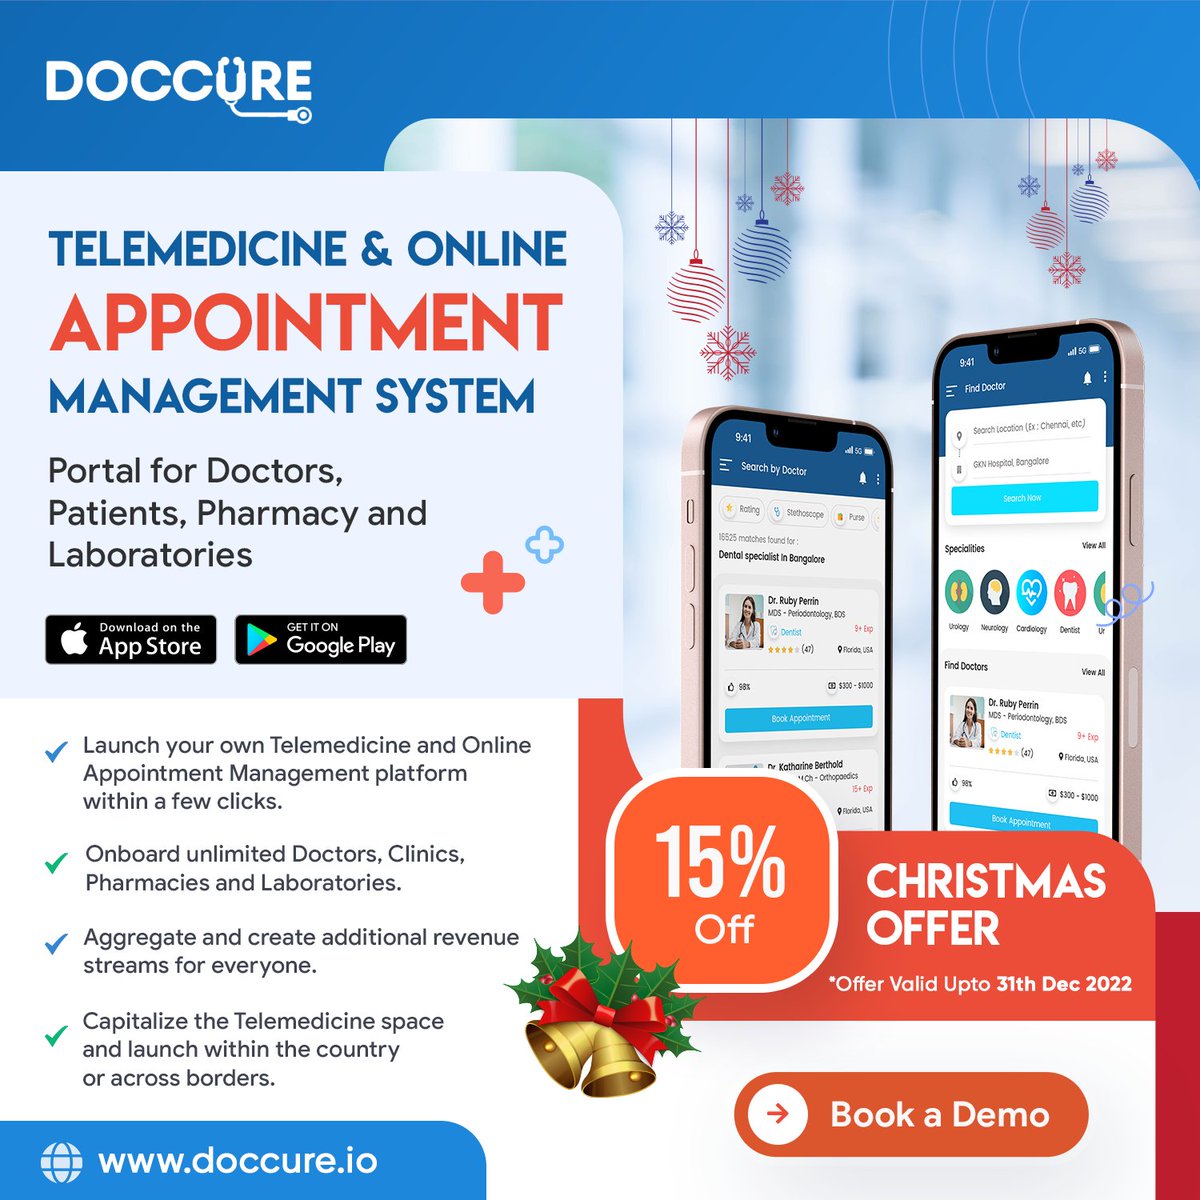 #Christmas Offer 15% - Offer valid up to 31st December!
Inquiry for a free demo - lnkd.in/givpvaFD
#telemedicine #doctors #pharmacy #hospitals #medicine #clinicaldatamanagement #patient #healthcare #medical #doctors #patient  #christmasoffer #ChristmasOffering #Christmas